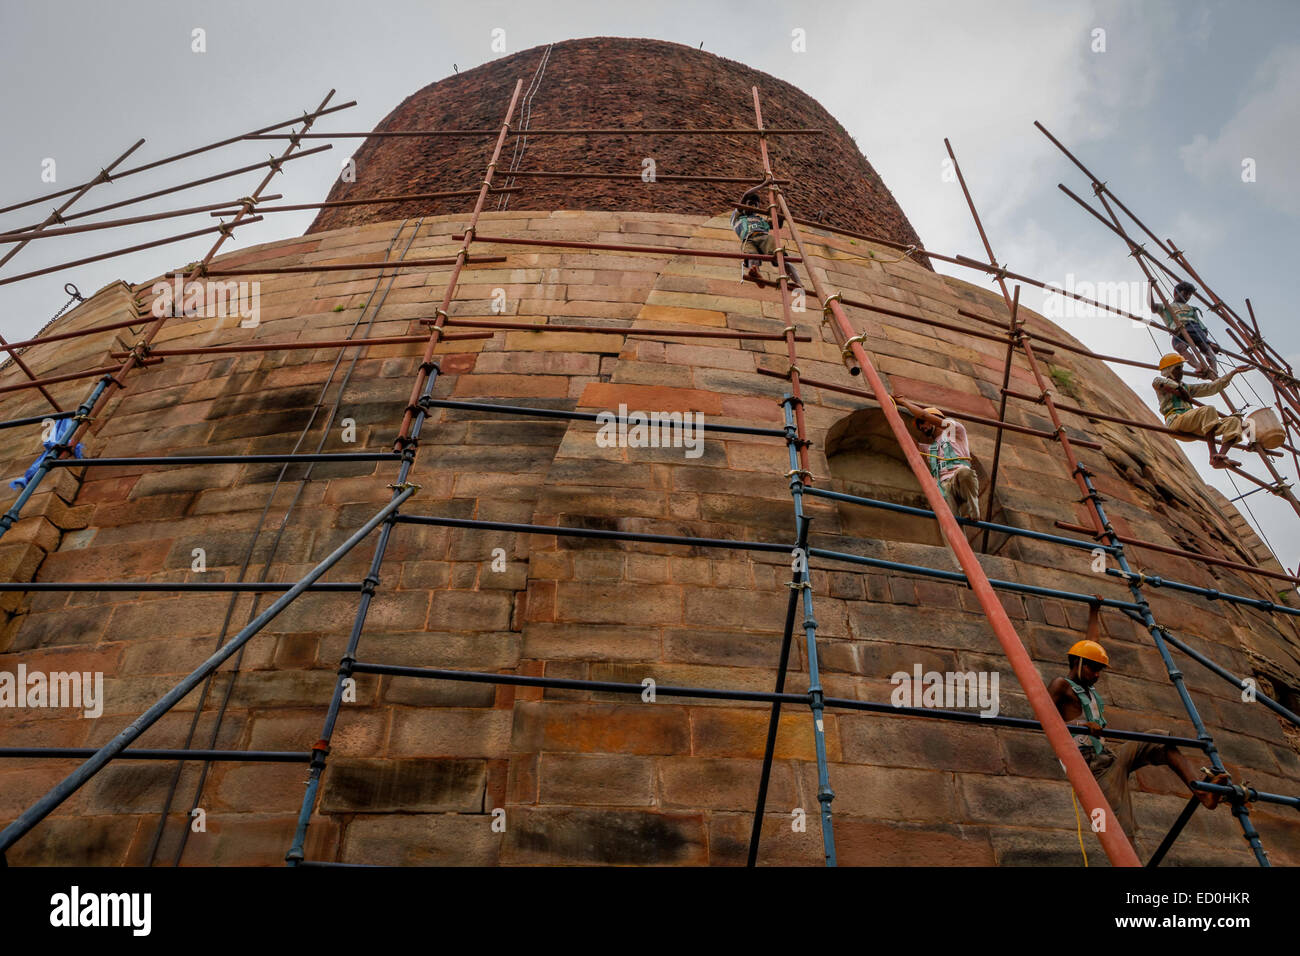 Workers on scaffolding during a maintenance project at Dhamek stupa in Sarnath, on the outskirts of Varanasi, Uttar Pradesh, India. Stock Photo